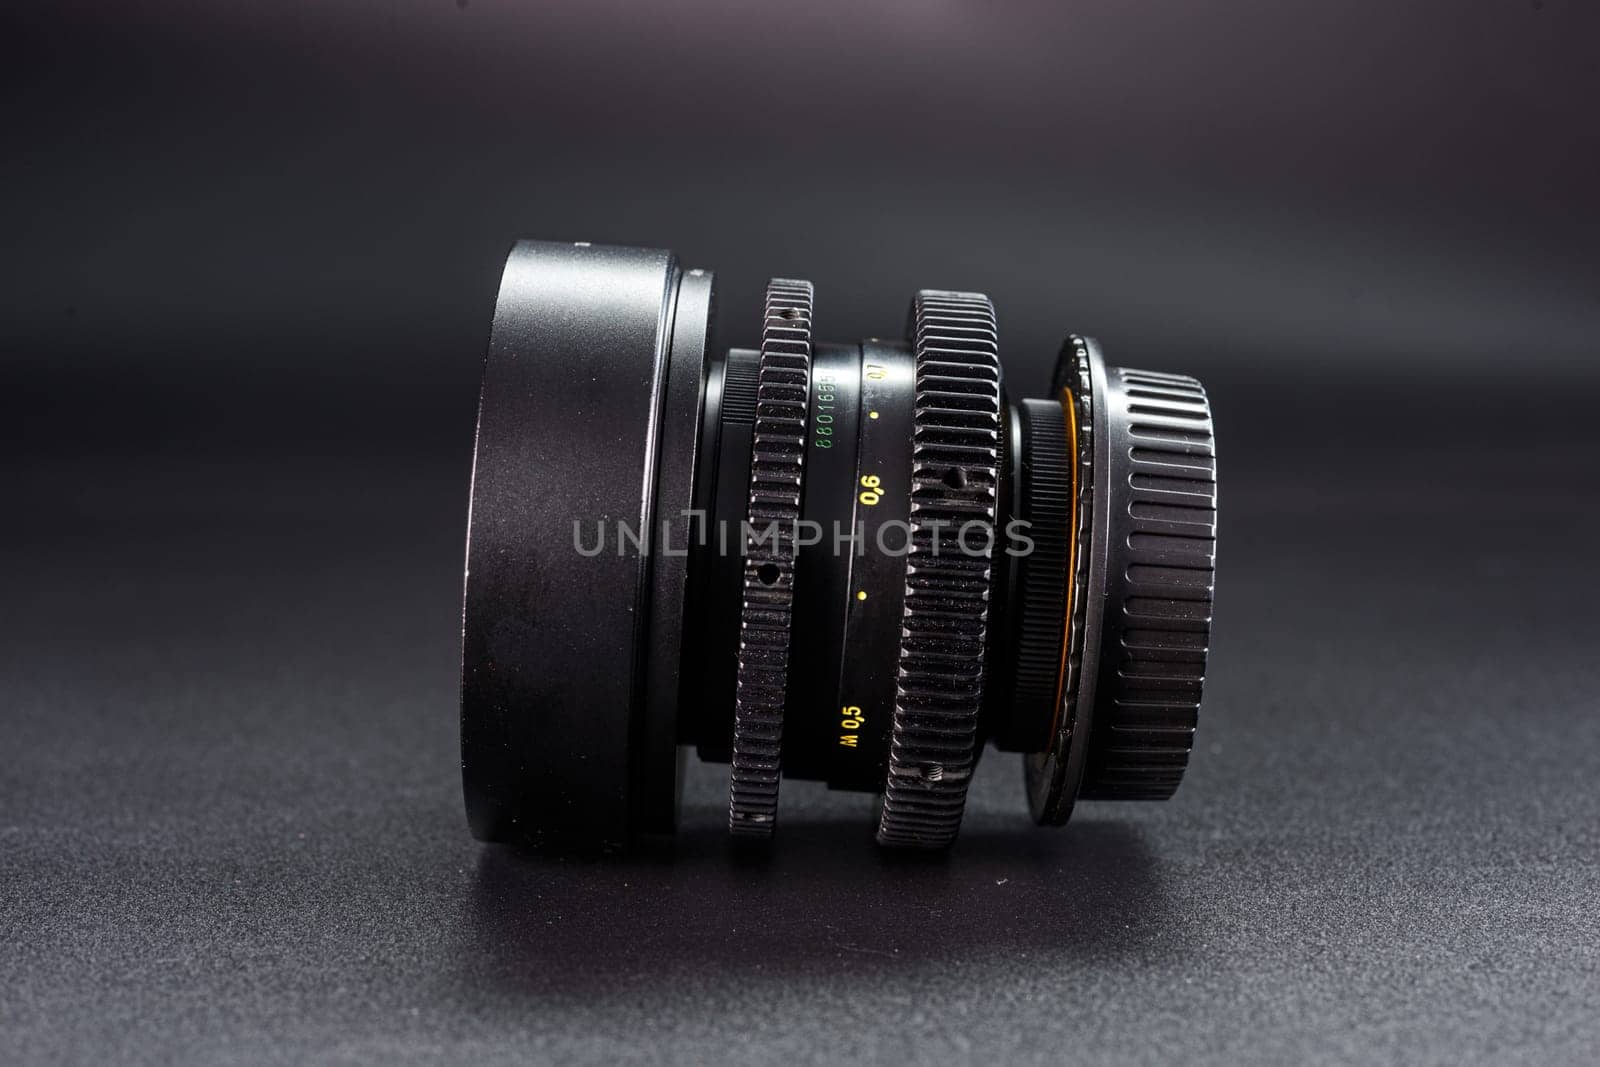 Side angle of antique camera lens showcasing focus dials, numbered settings, photography enthusiasts collectible, placed against gradient dark background by mosfet_ua